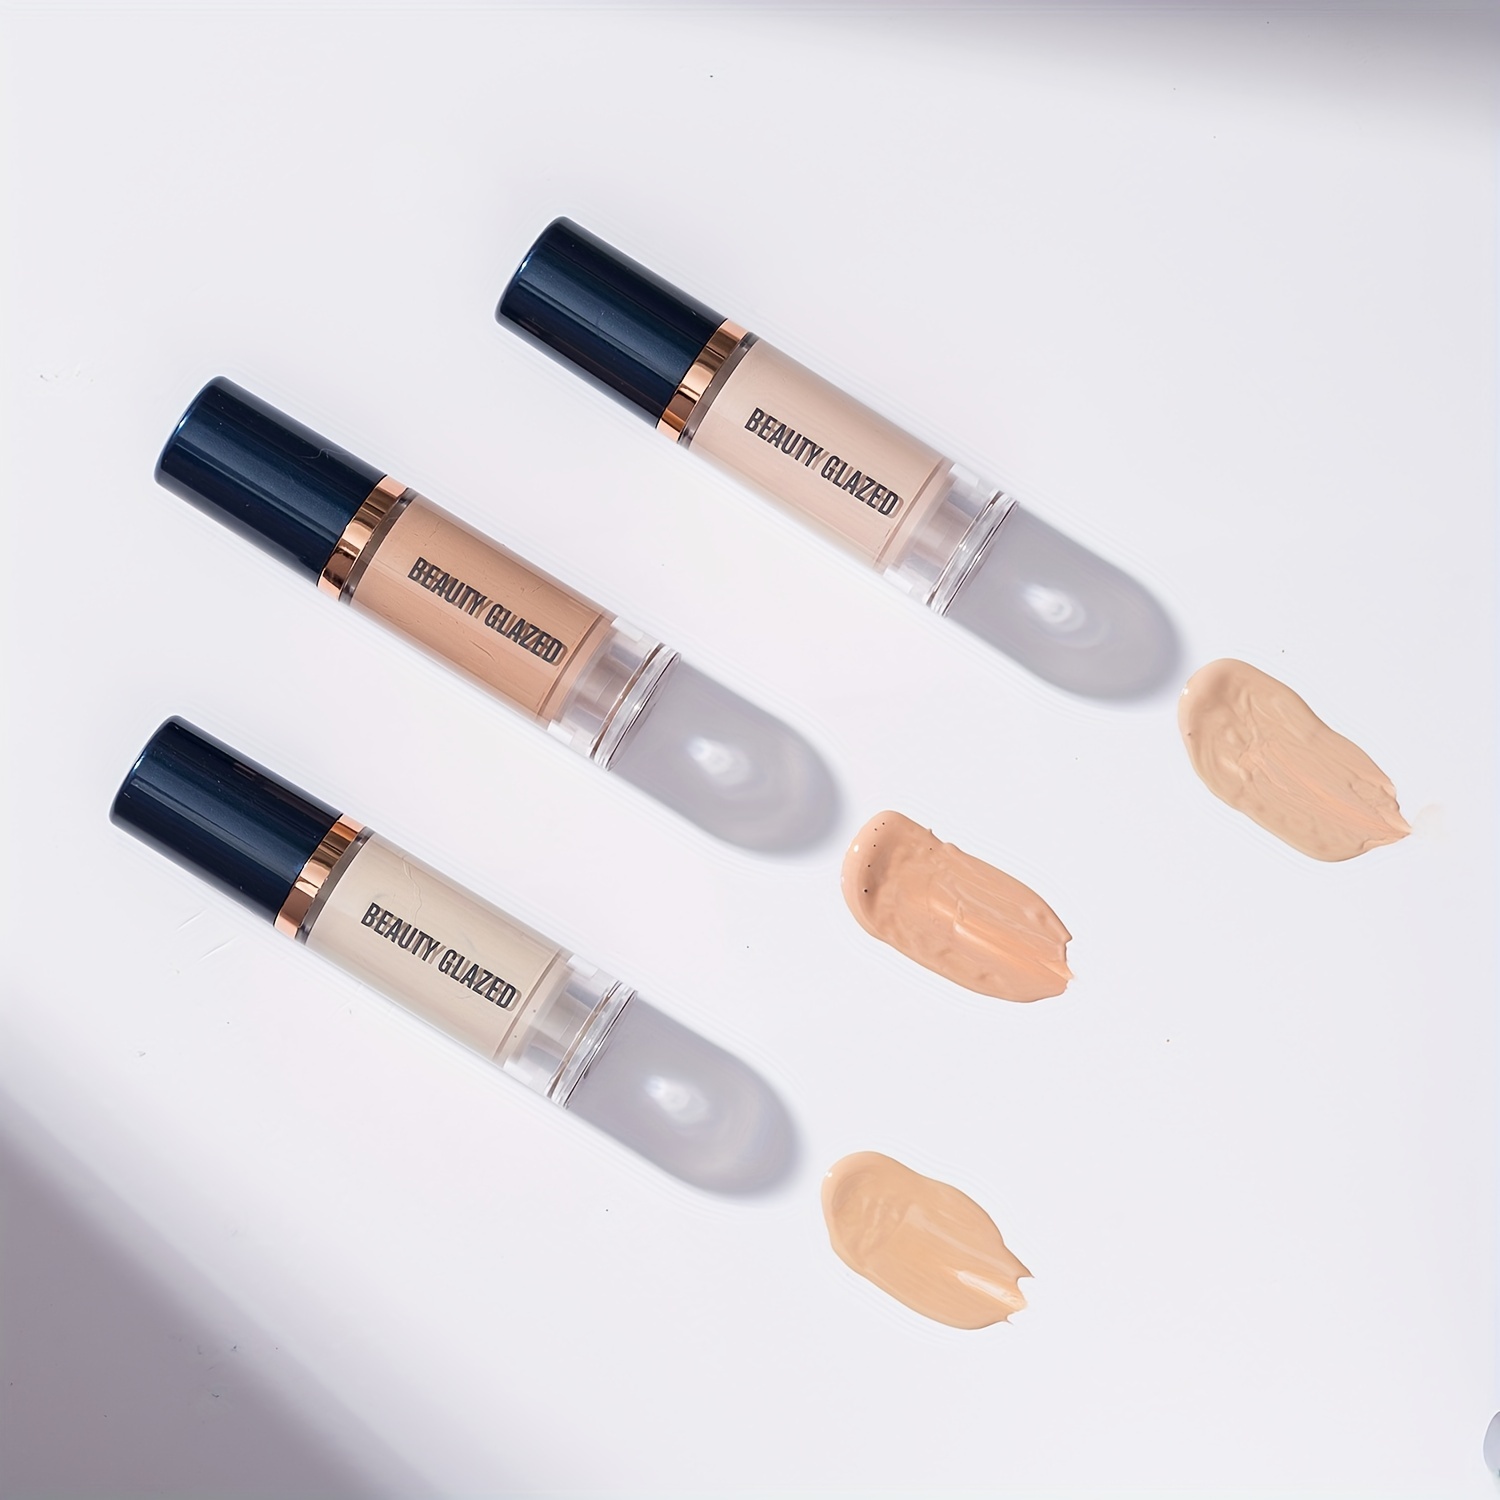 How To Choose Foundation Shades and Formulas